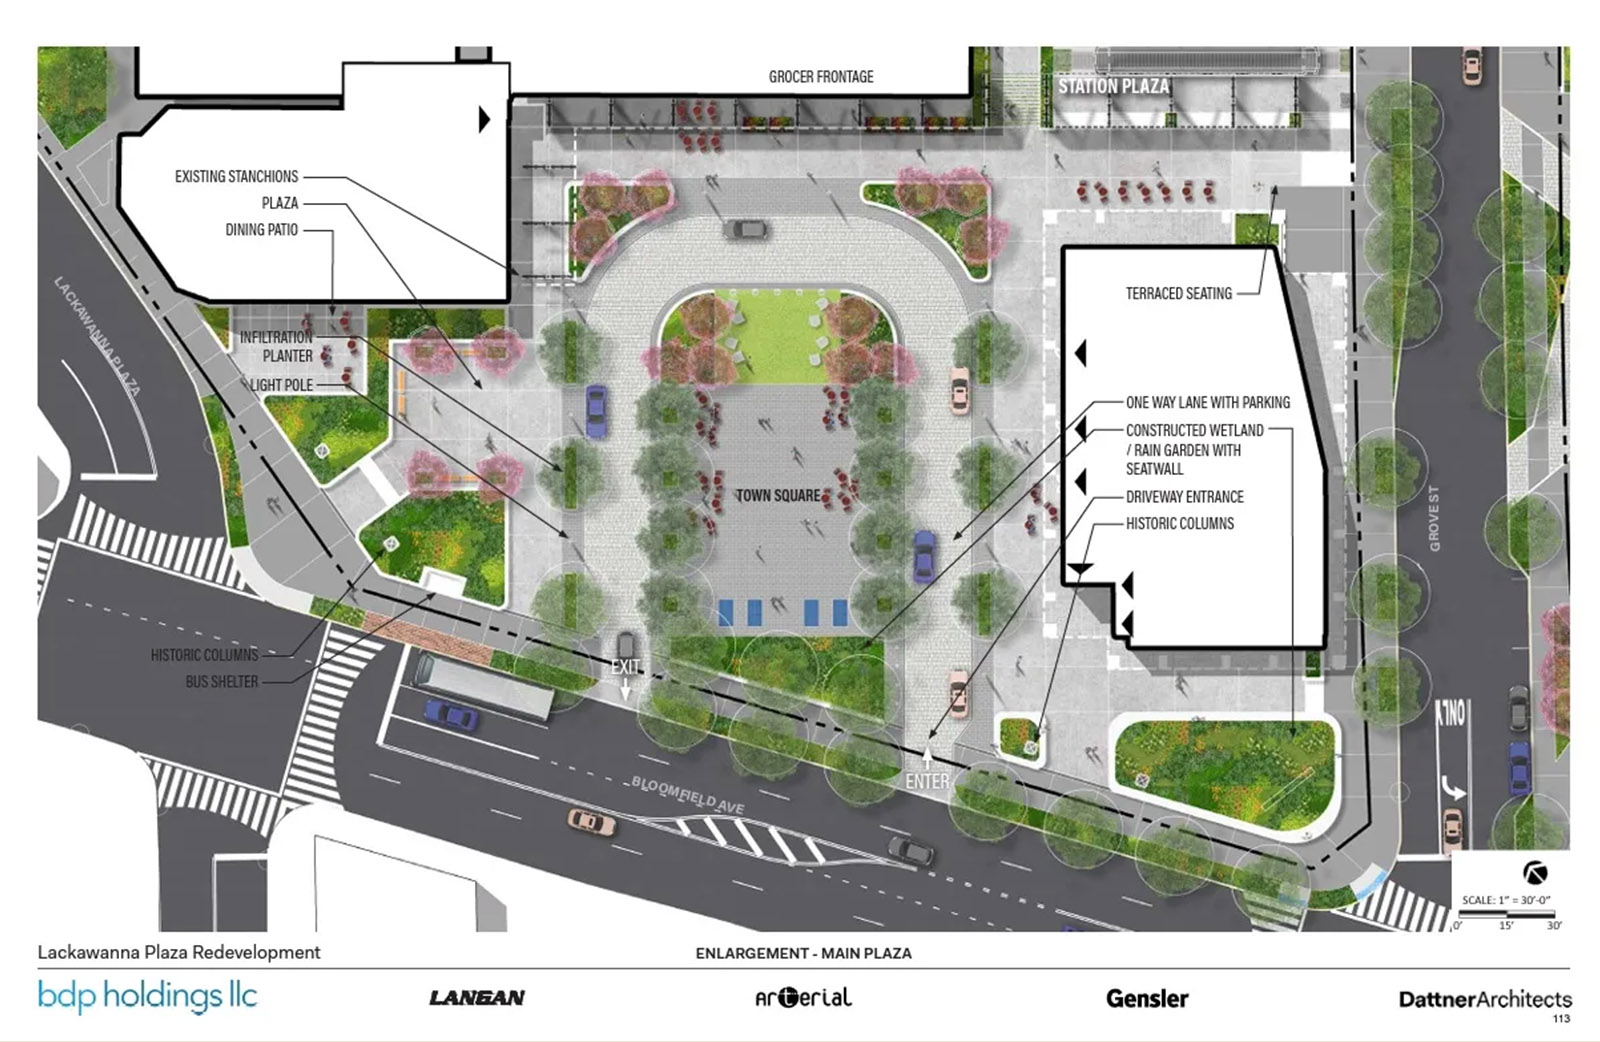 Rendering of the revised plan for Montclair's Lackawanna Plaza from the architect (Dattner Architects)